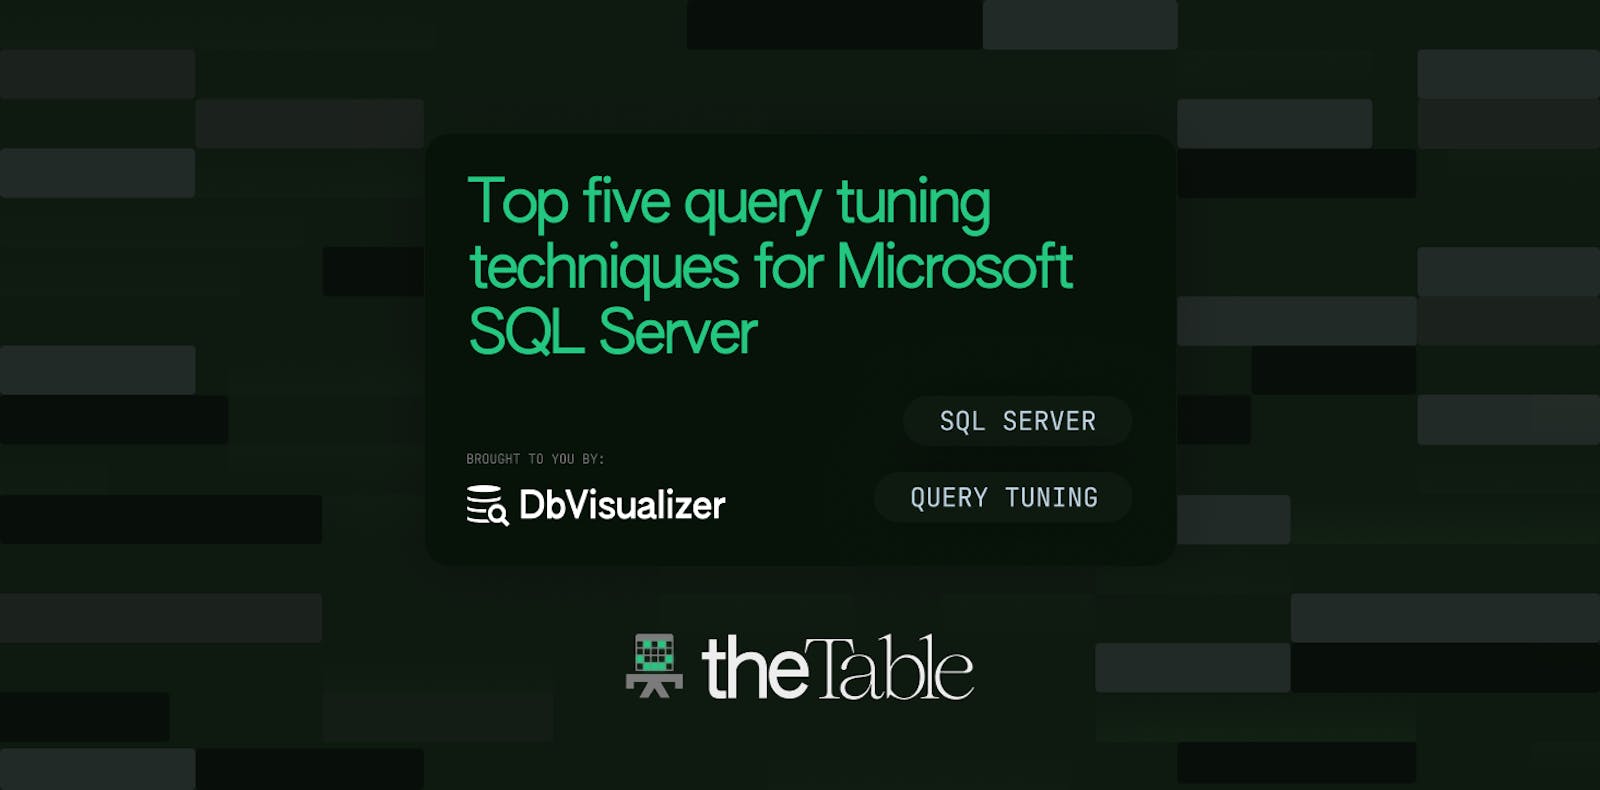 Top five query tuning techniques for Microsoft SQL Server